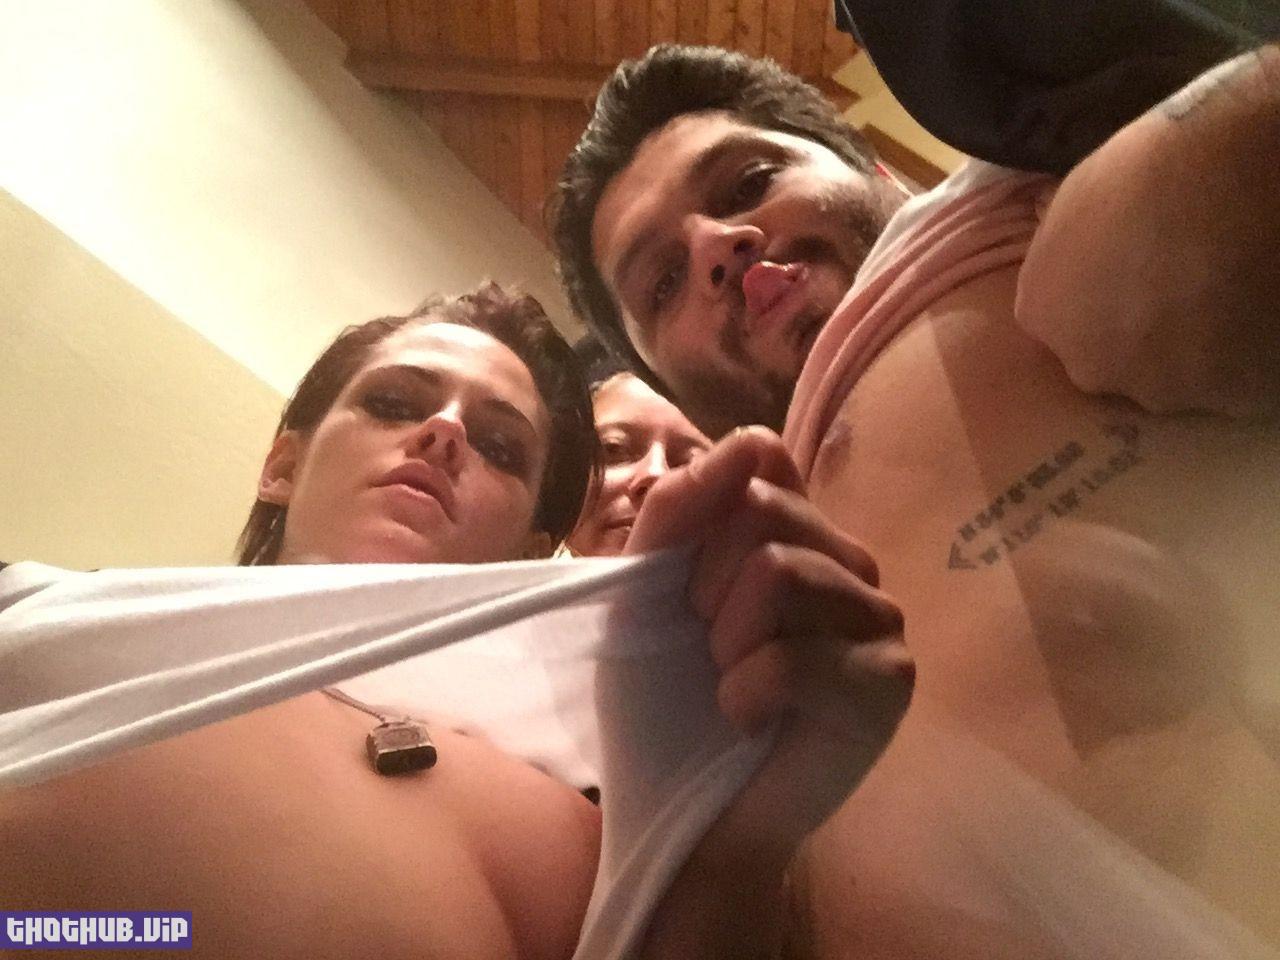 Twilight star Kristen Stewart nude photos leaked from iCloud The Fappening